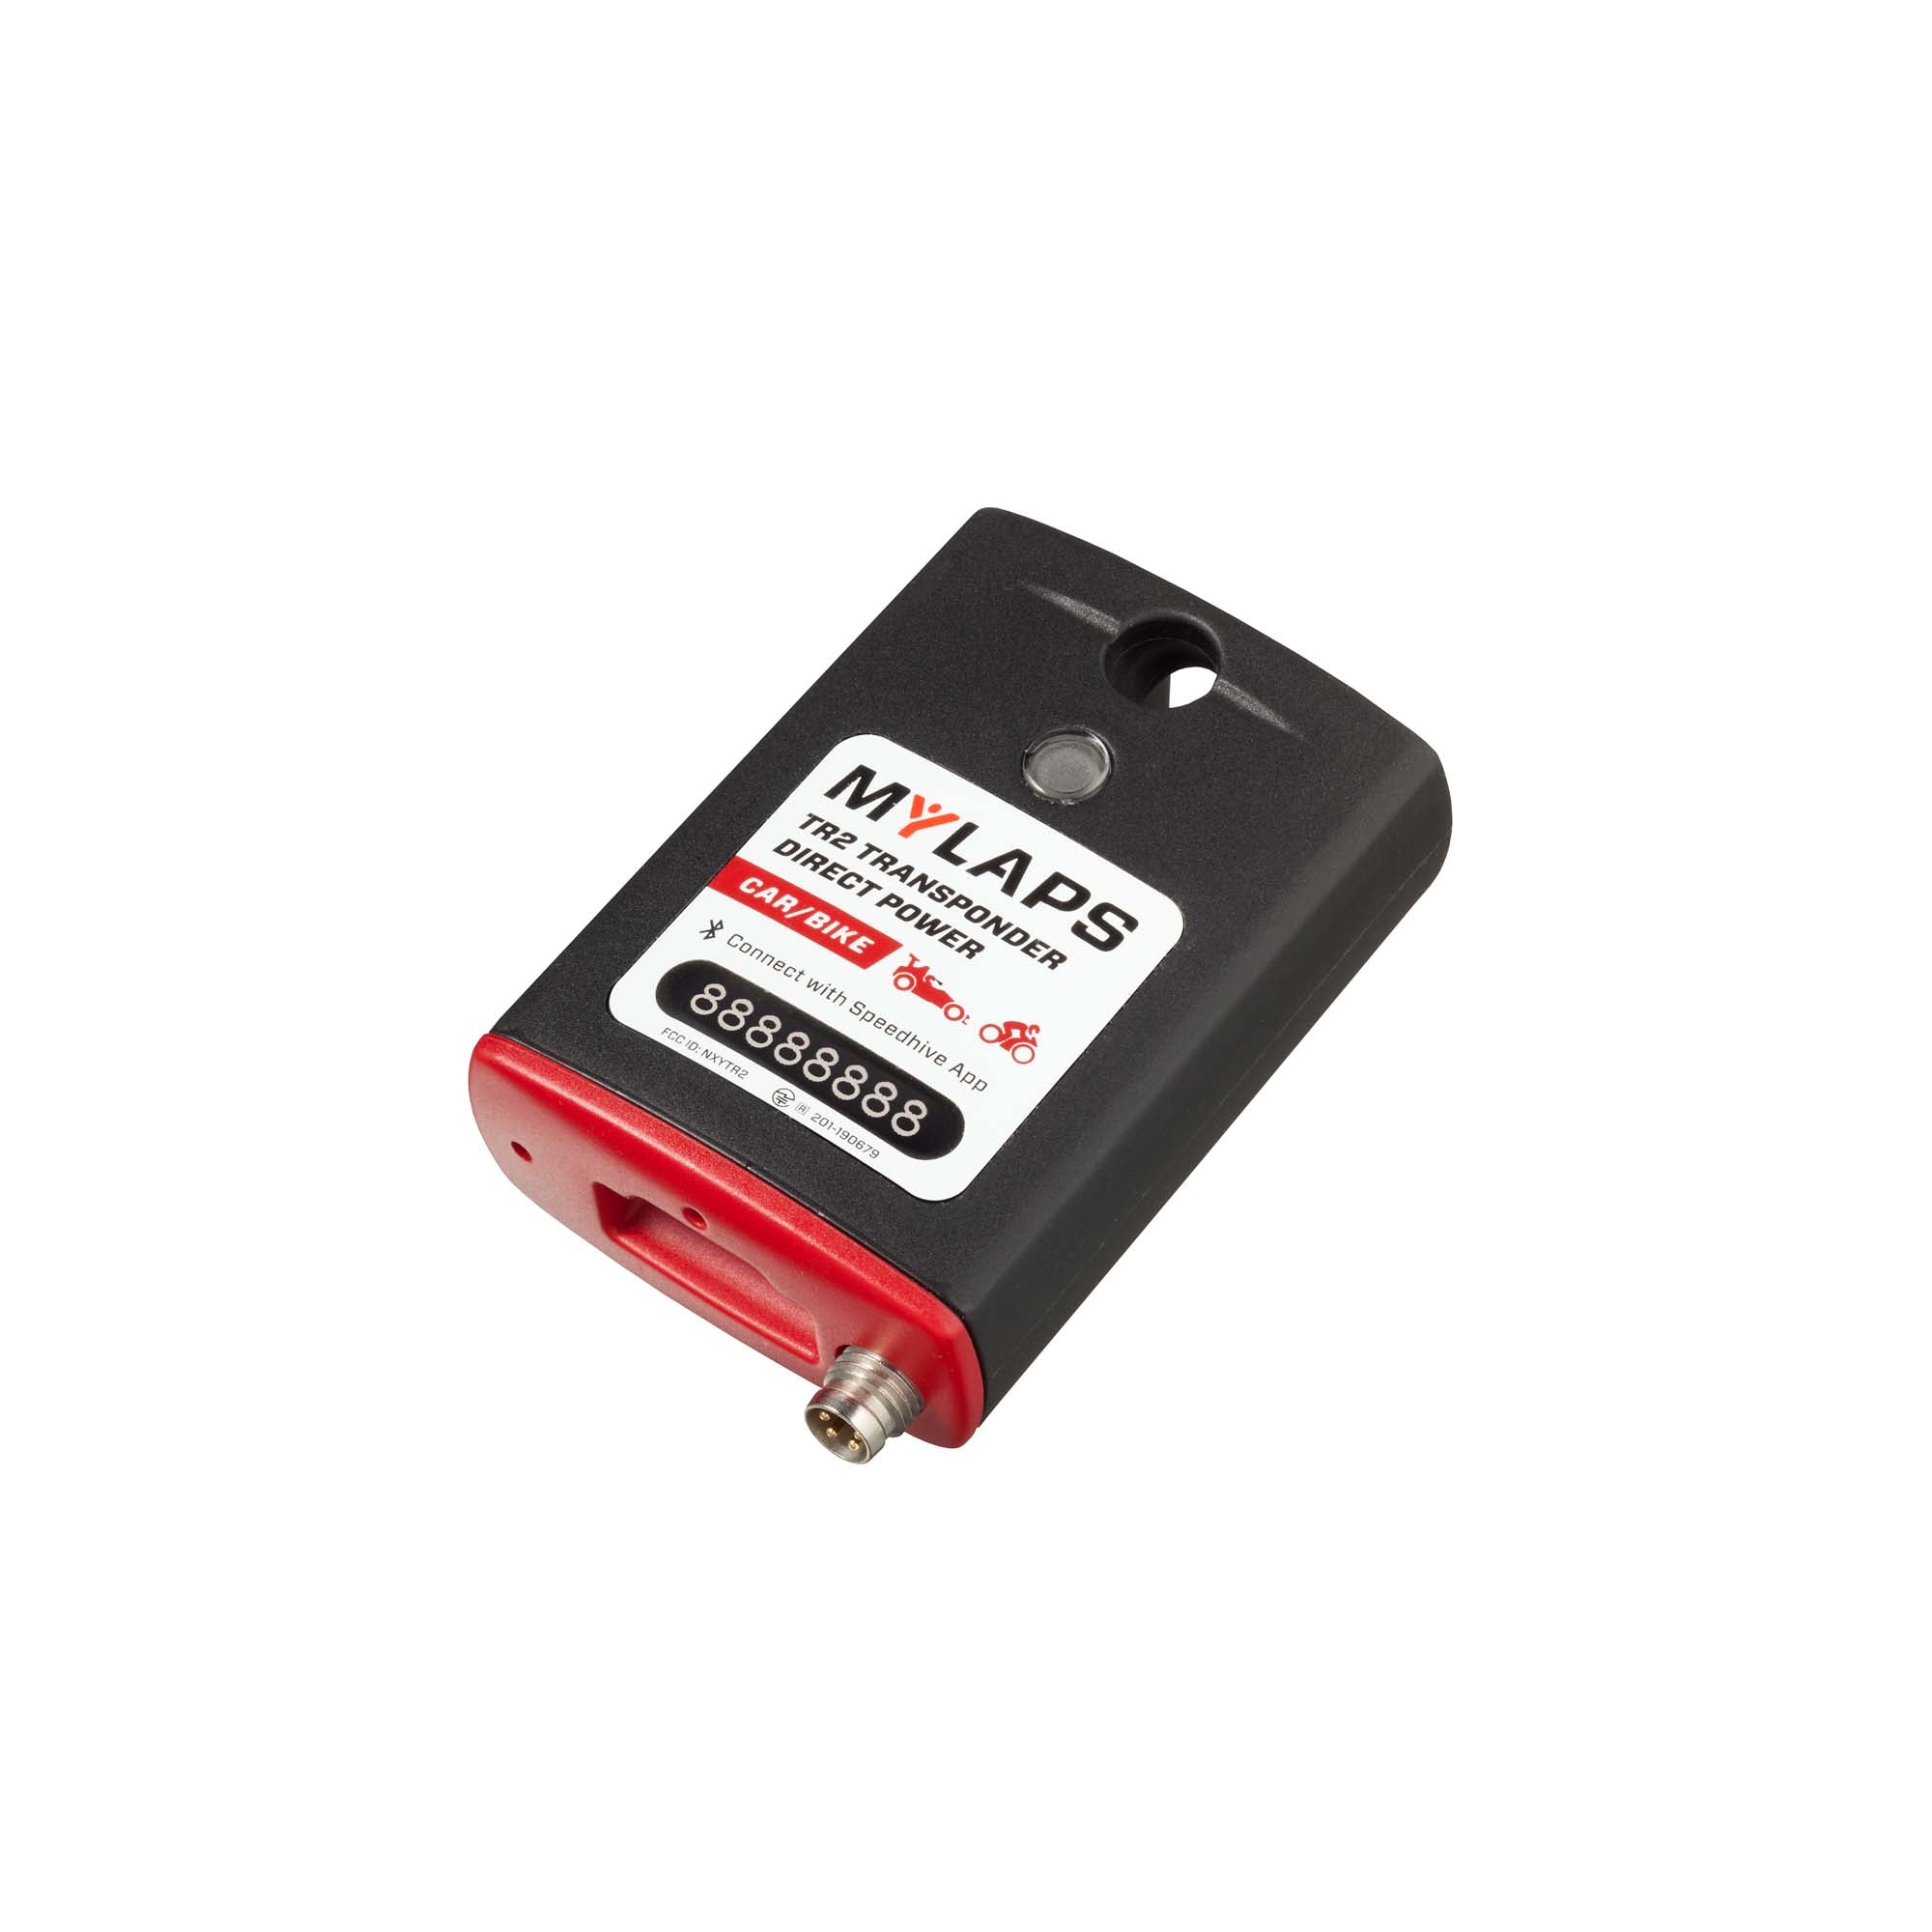 MyLaps TR2 Direct Power Transponder - 1-Year Subscription